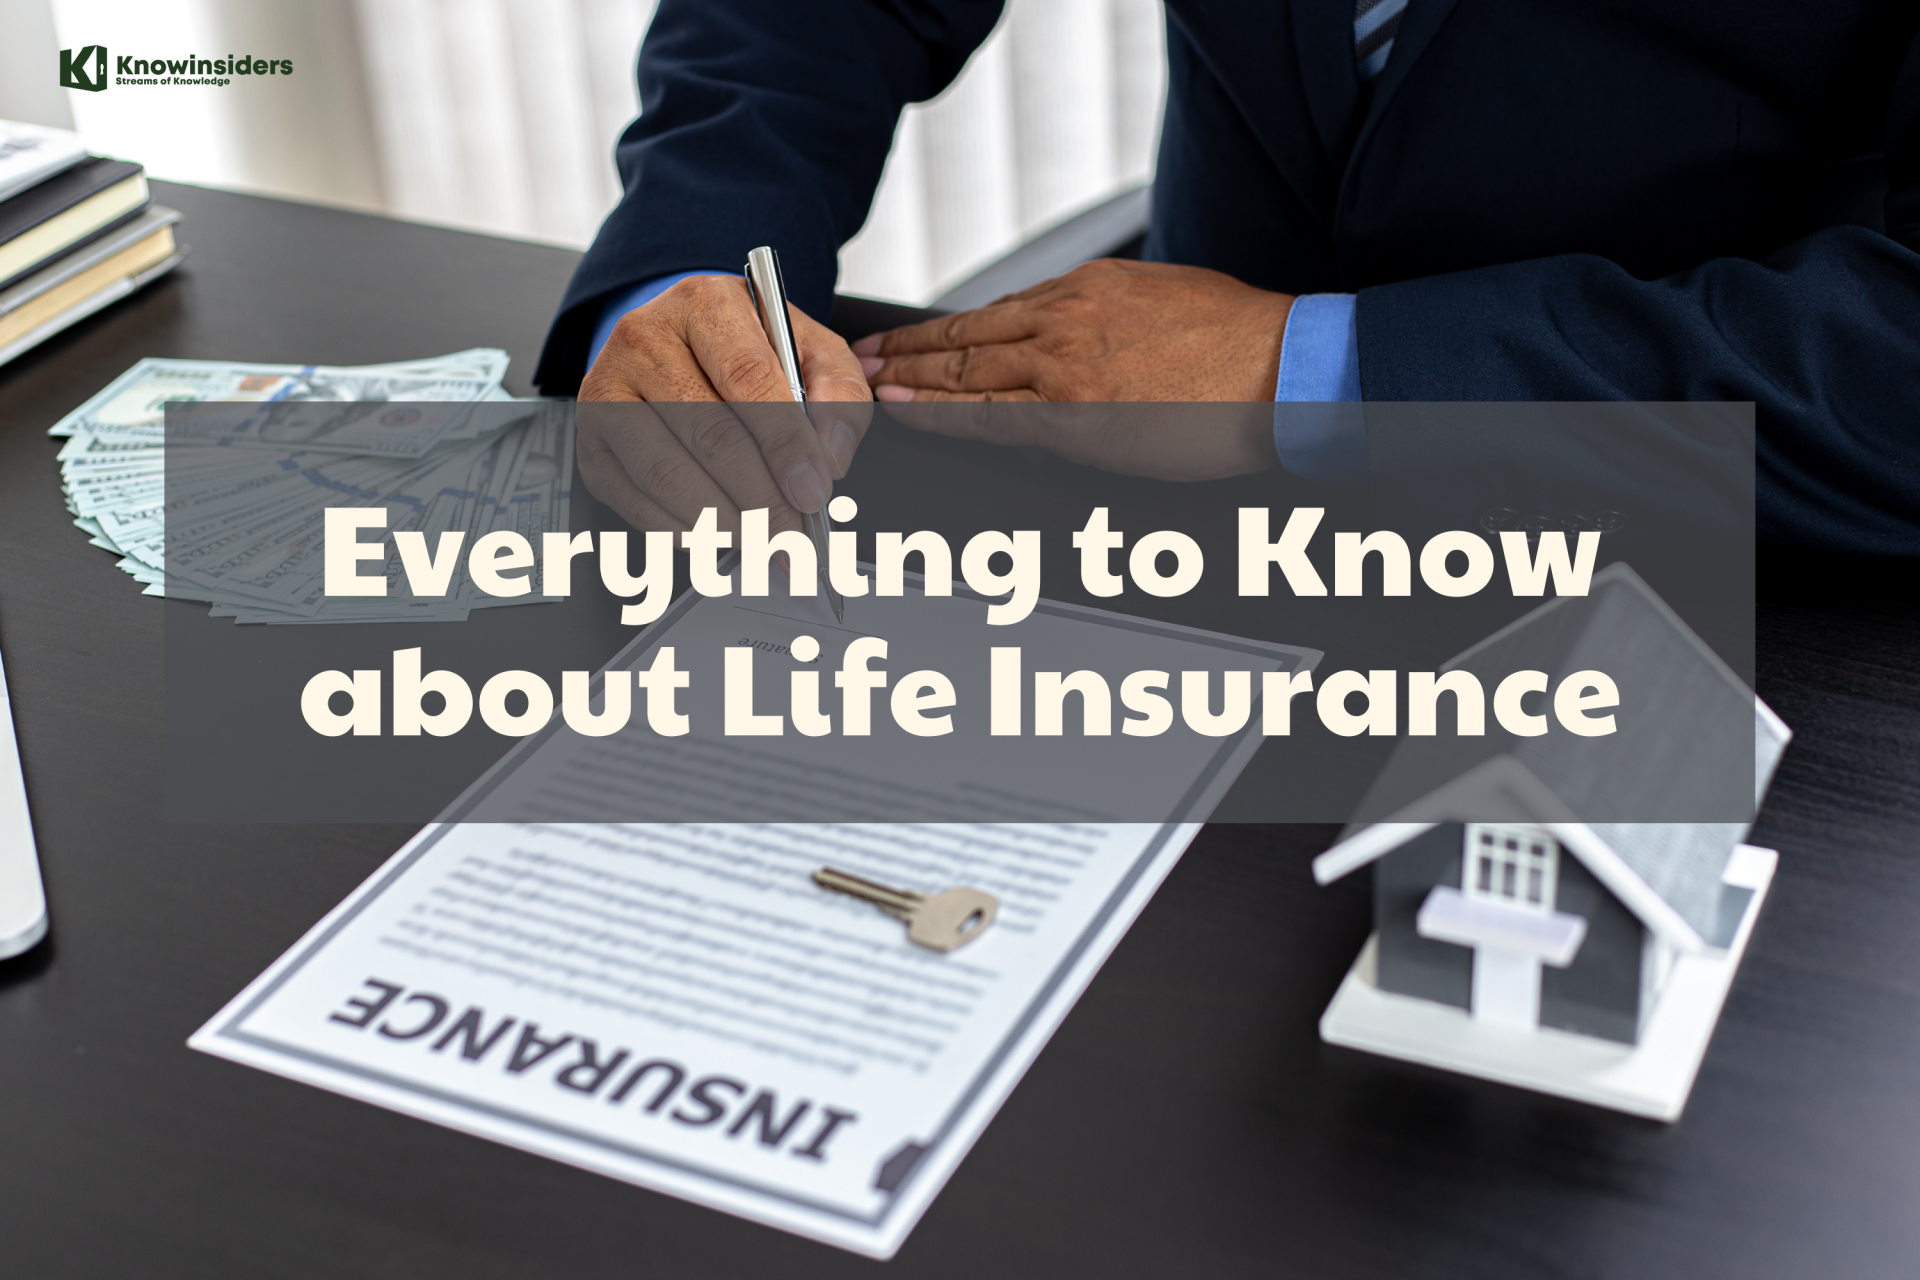 Life Insurance: Purposes, Types, Benefits and Cost